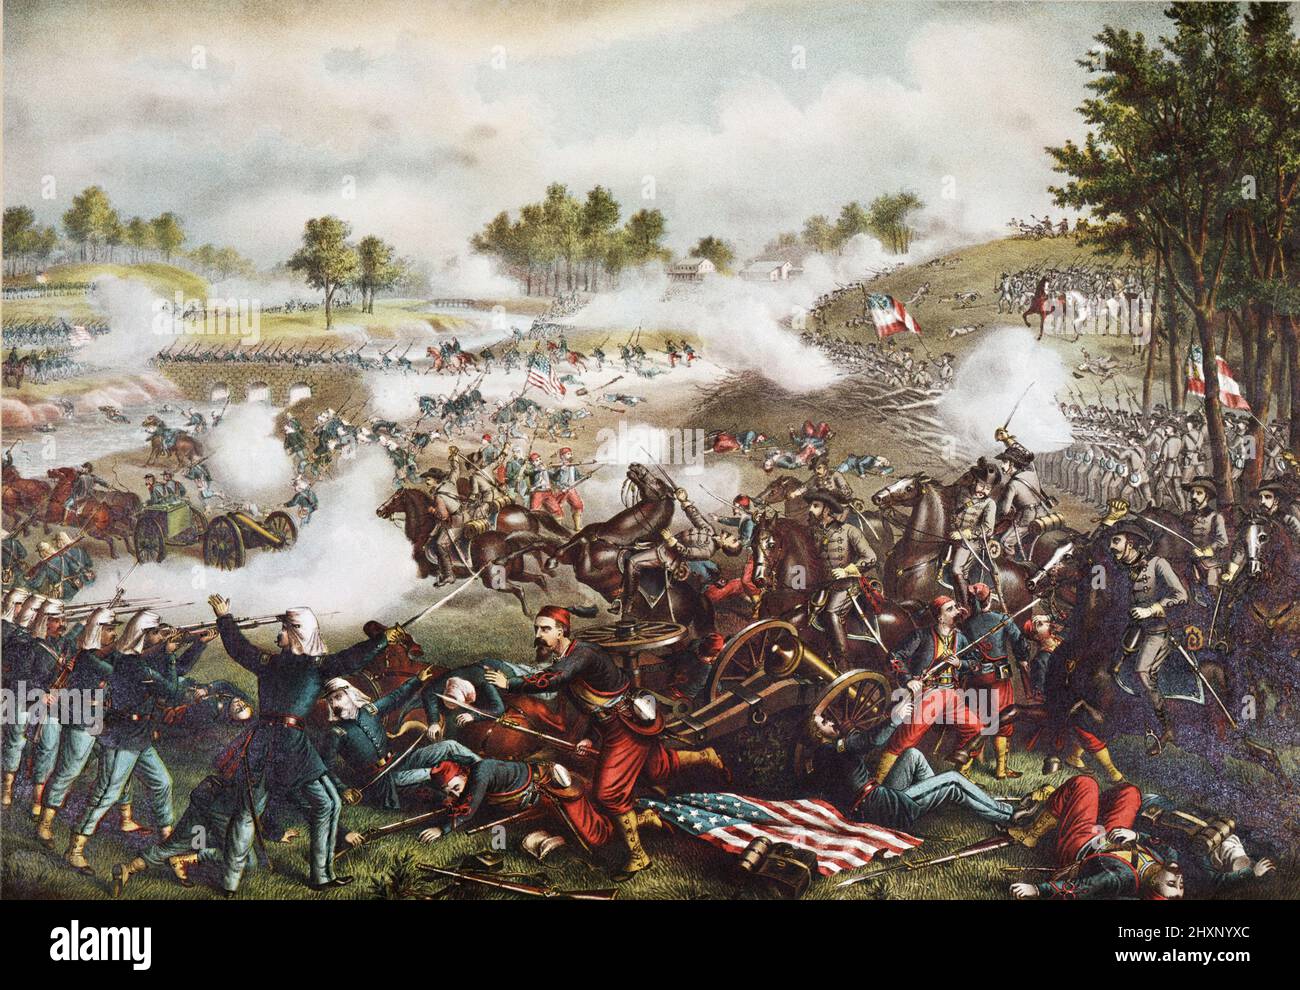 First Battle of Bull Run chromolithograph by Kurz & Allison The First Battle of Bull Run (the name used by Union forces), also known as the Battle of First Manassas (the name used by Confederate forces), was the first major battle of the American Civil War. The battle was fought on July 21, 1861, in Prince William County, Virginia, just north of the city of Manassas and about 30 miles west-southwest of Washington, D.C. The Union's forces were slow in positioning themselves, allowing Confederate reinforcements time to arrive by rail. Each side had about 18,000 poorly trained and poorly led troo Stock Photo